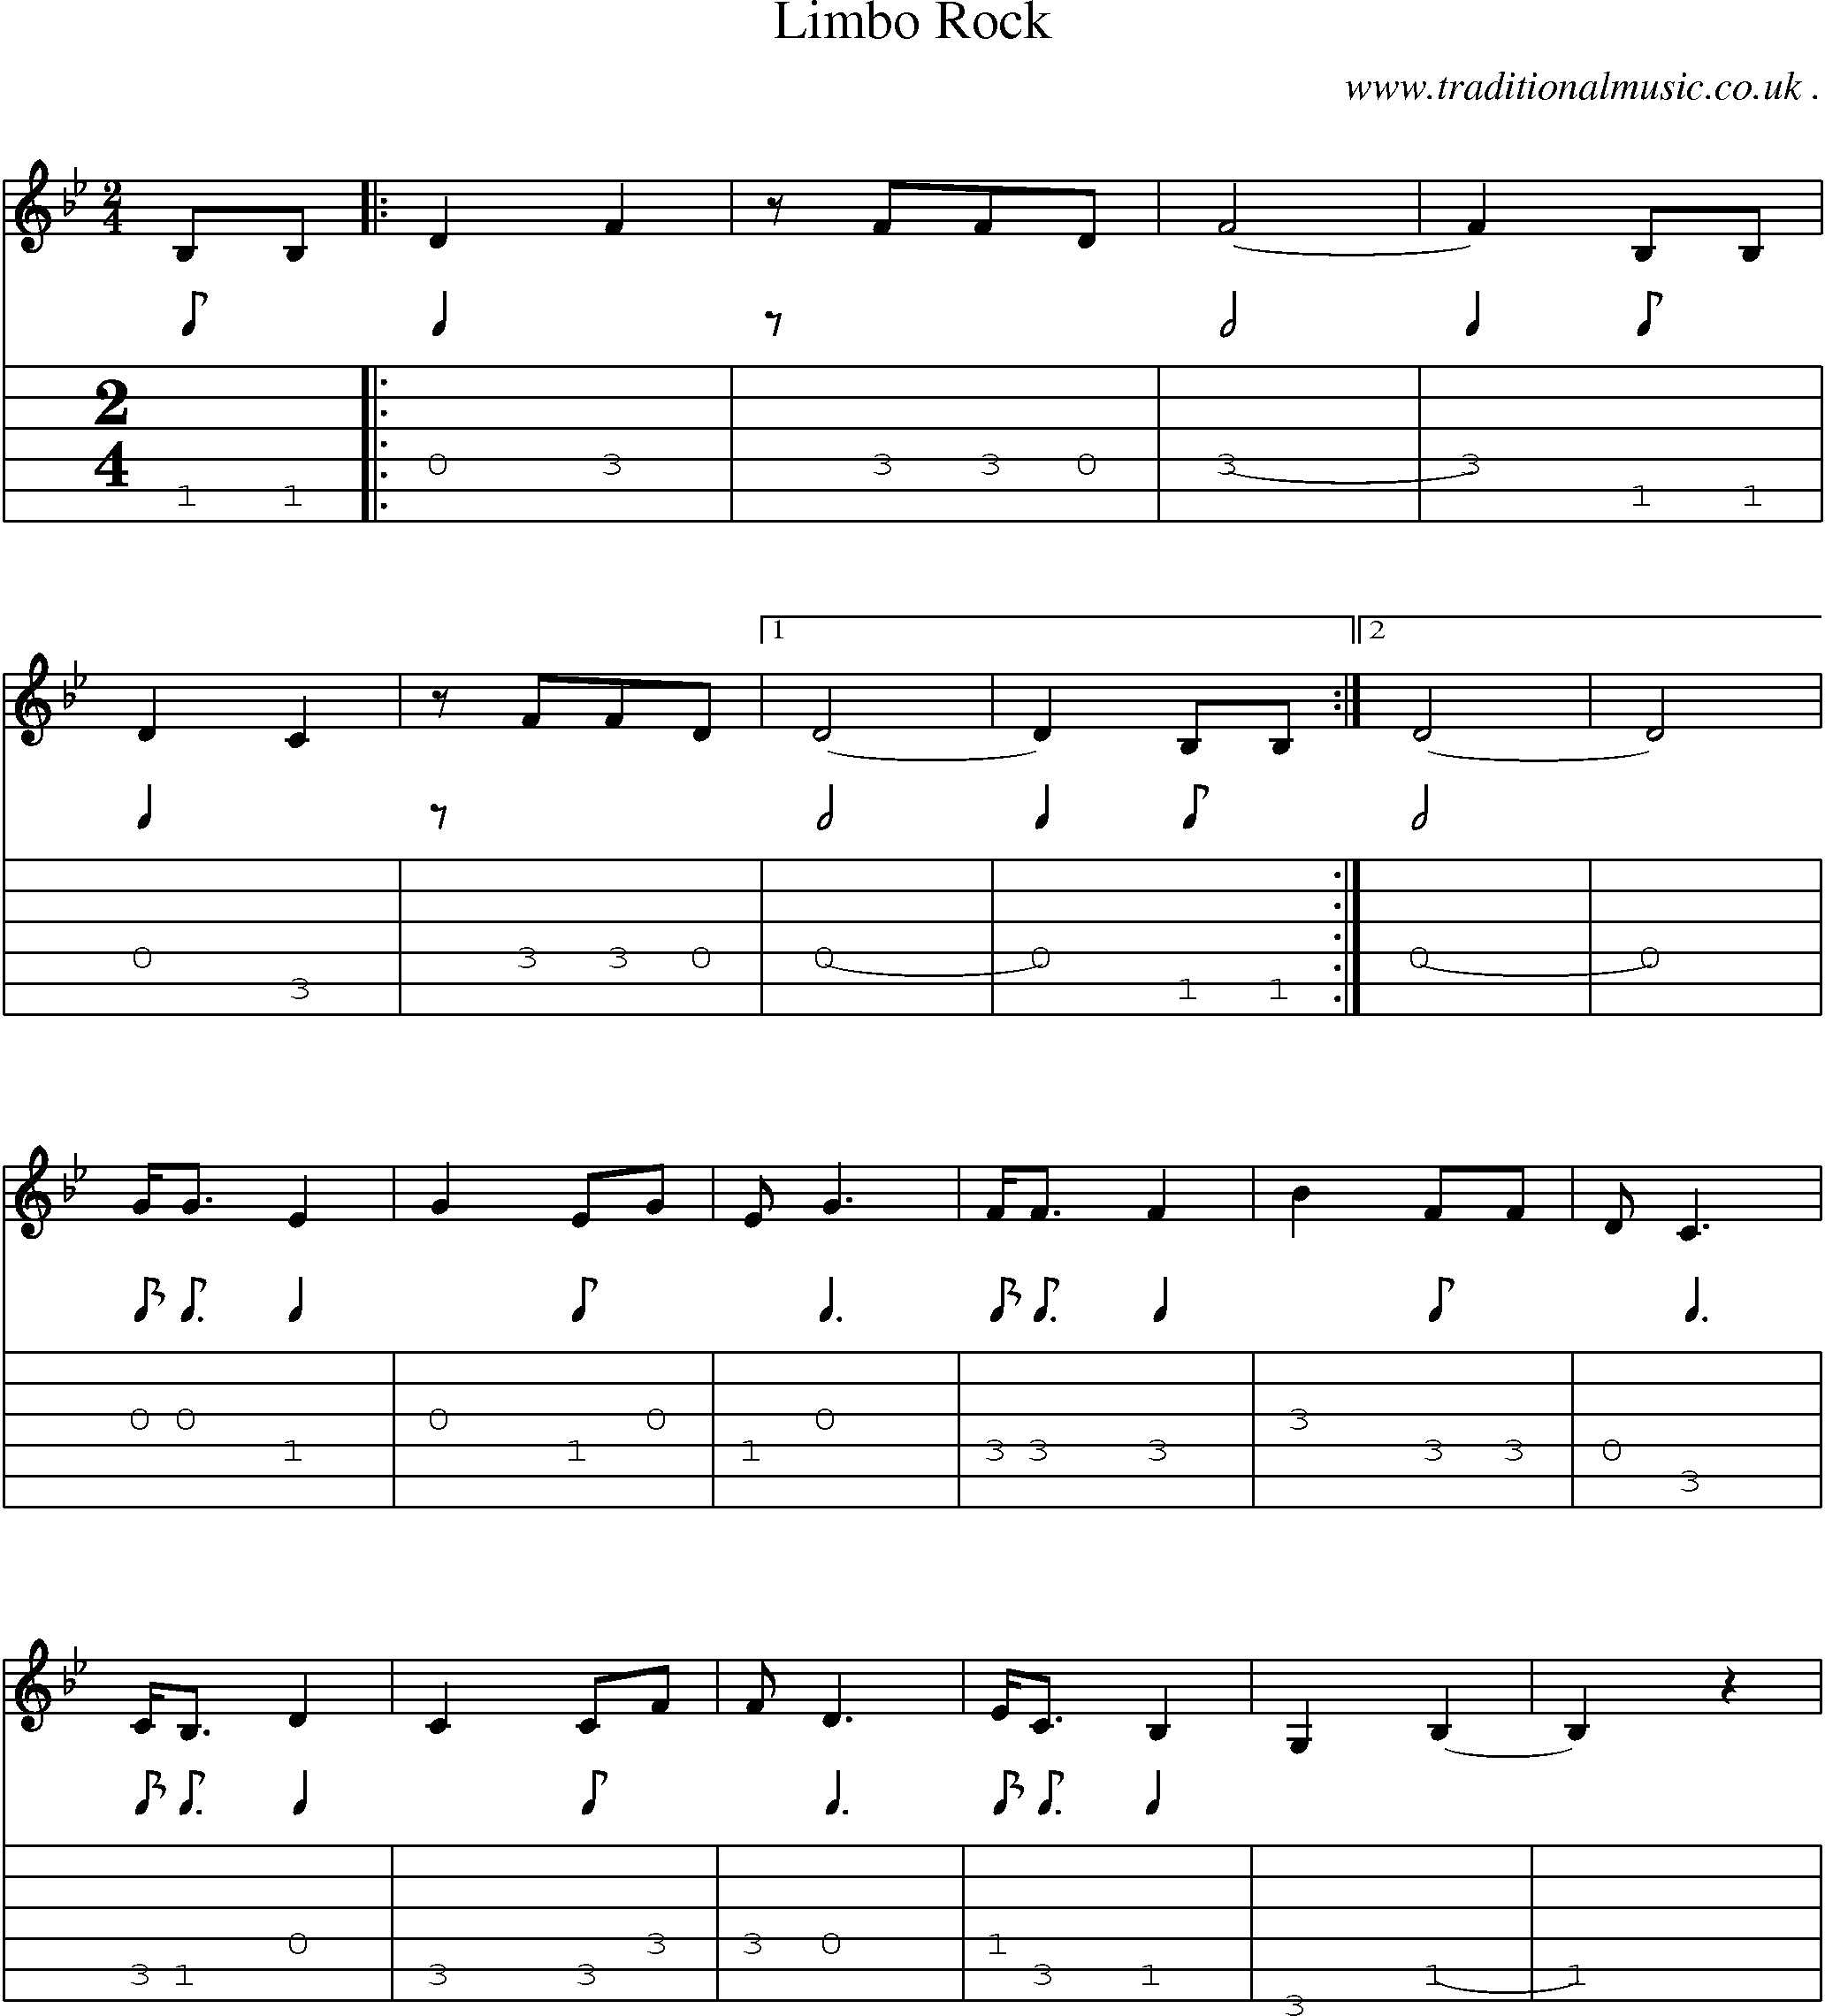 Music Score and Guitar Tabs for Limbo Rock